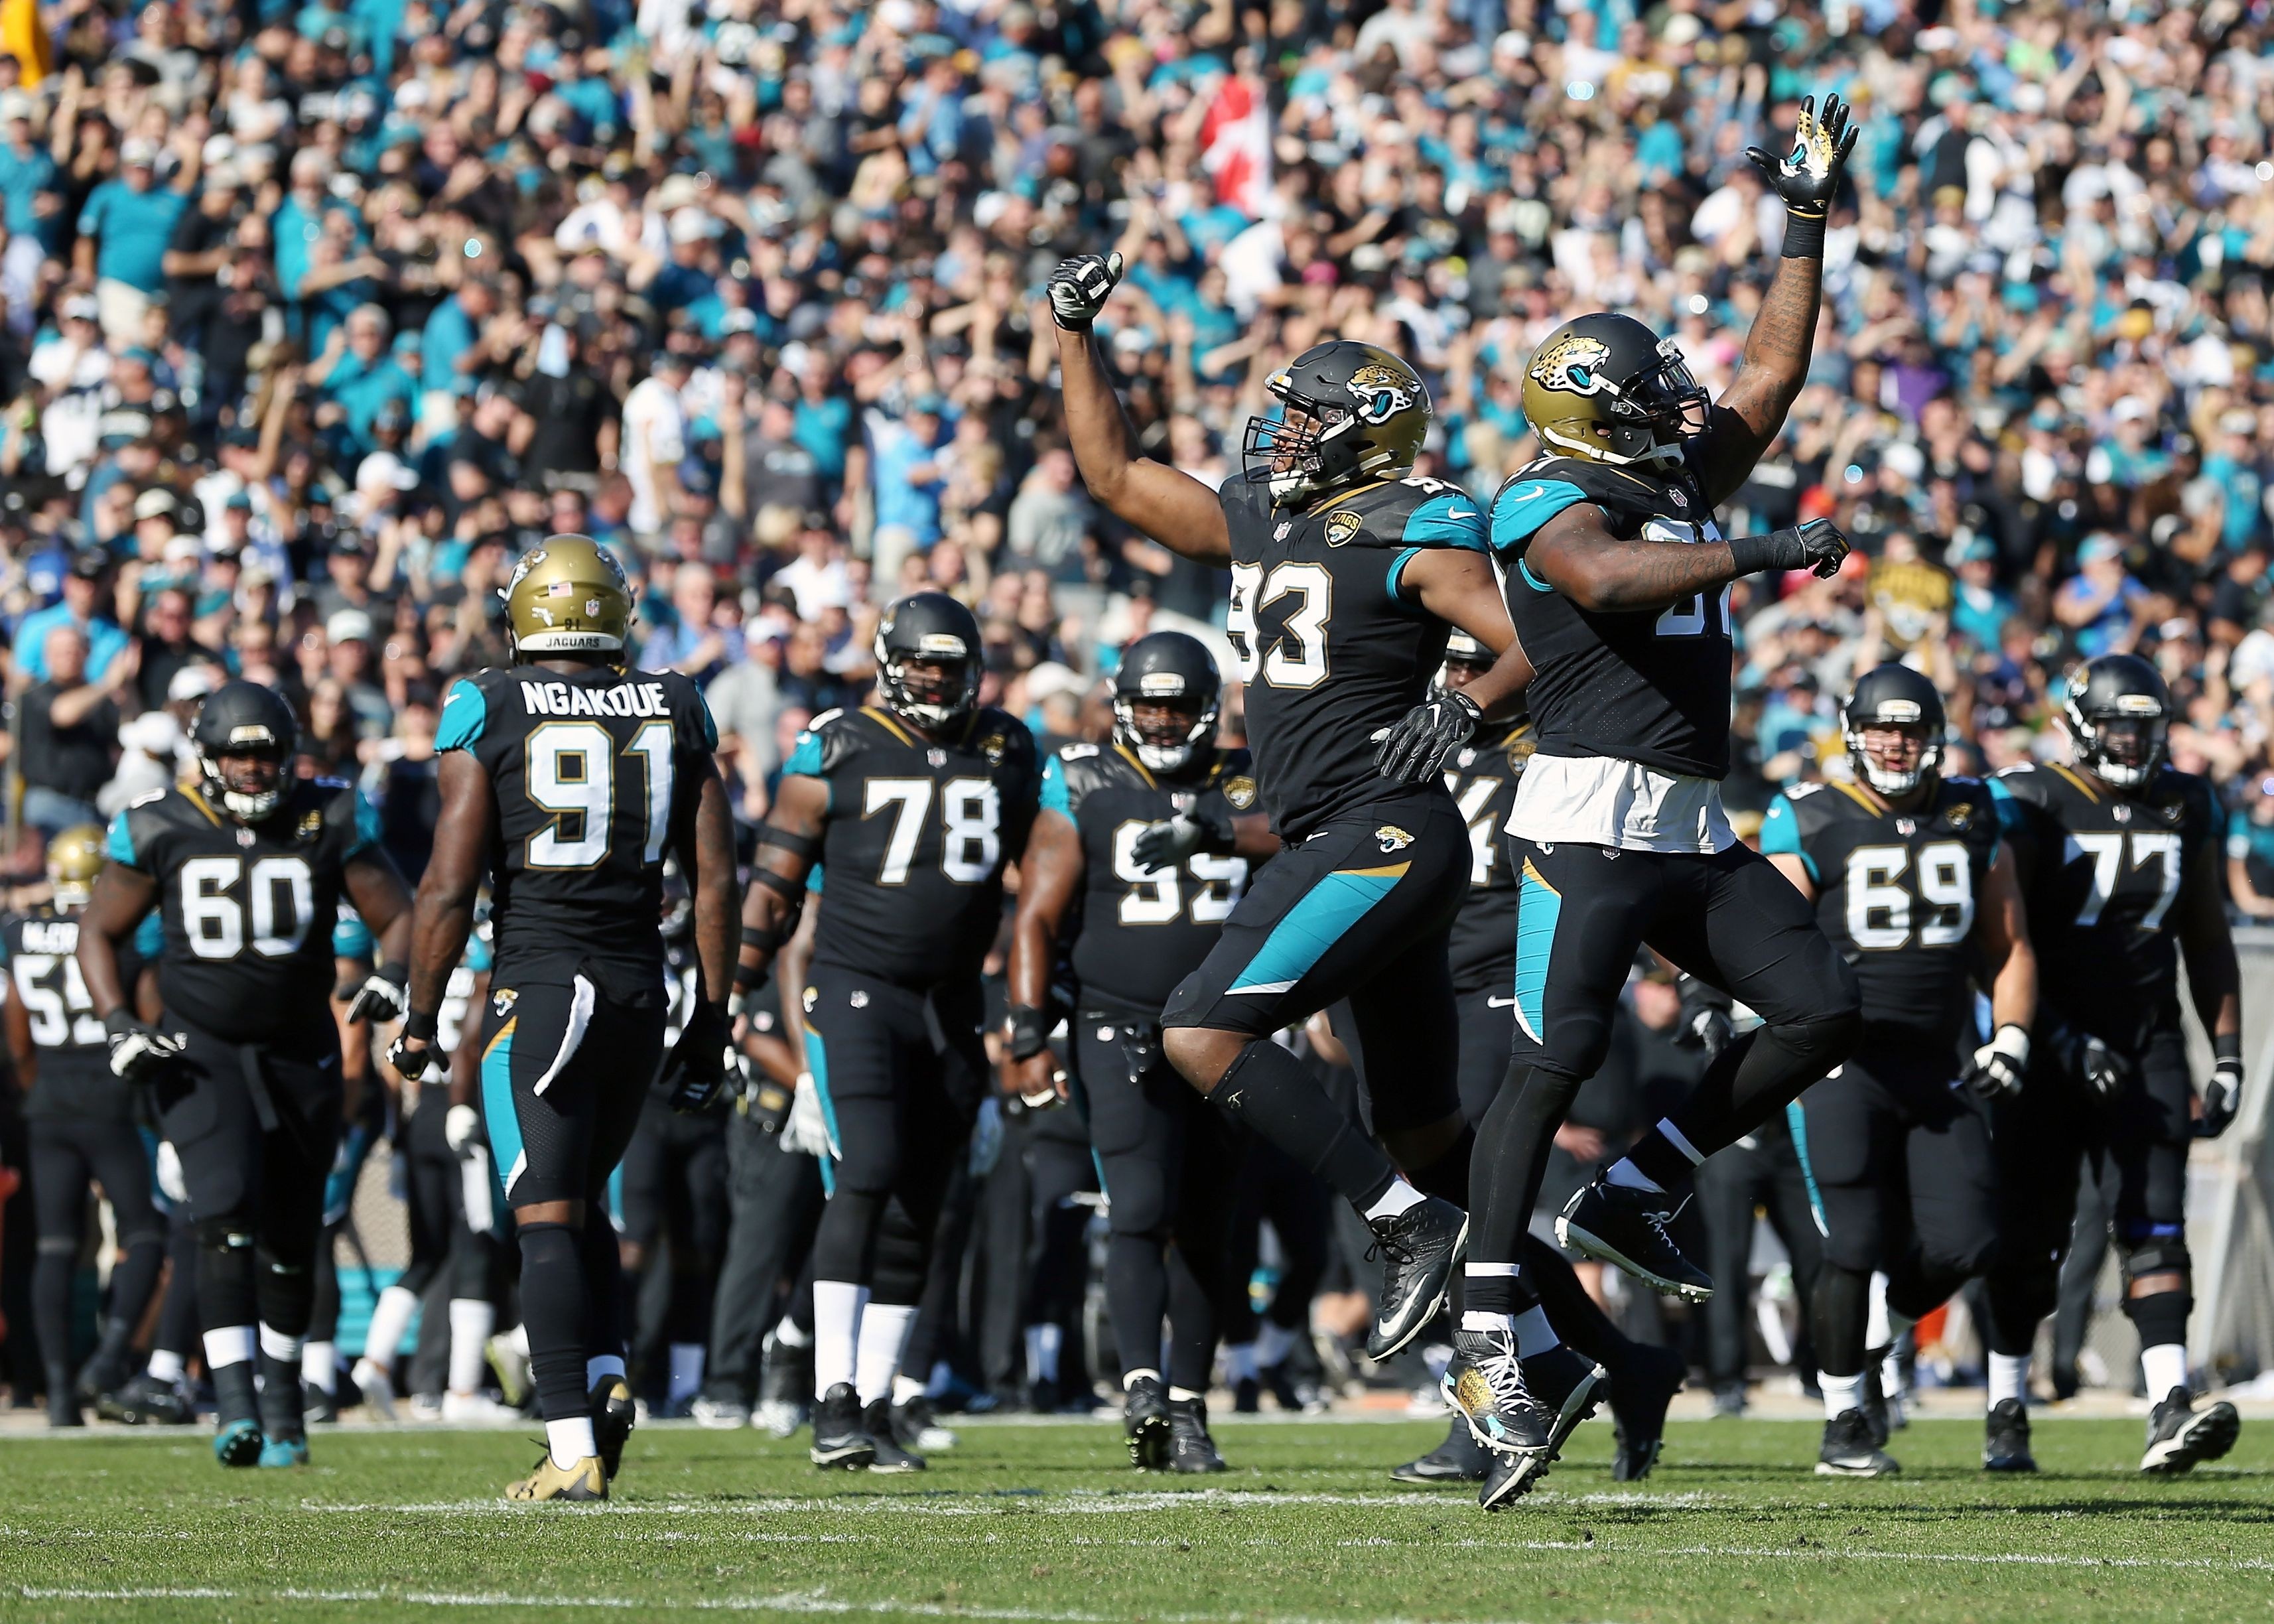 Jacksonville Jaguars Playoffs clinched, but more goals still in sight